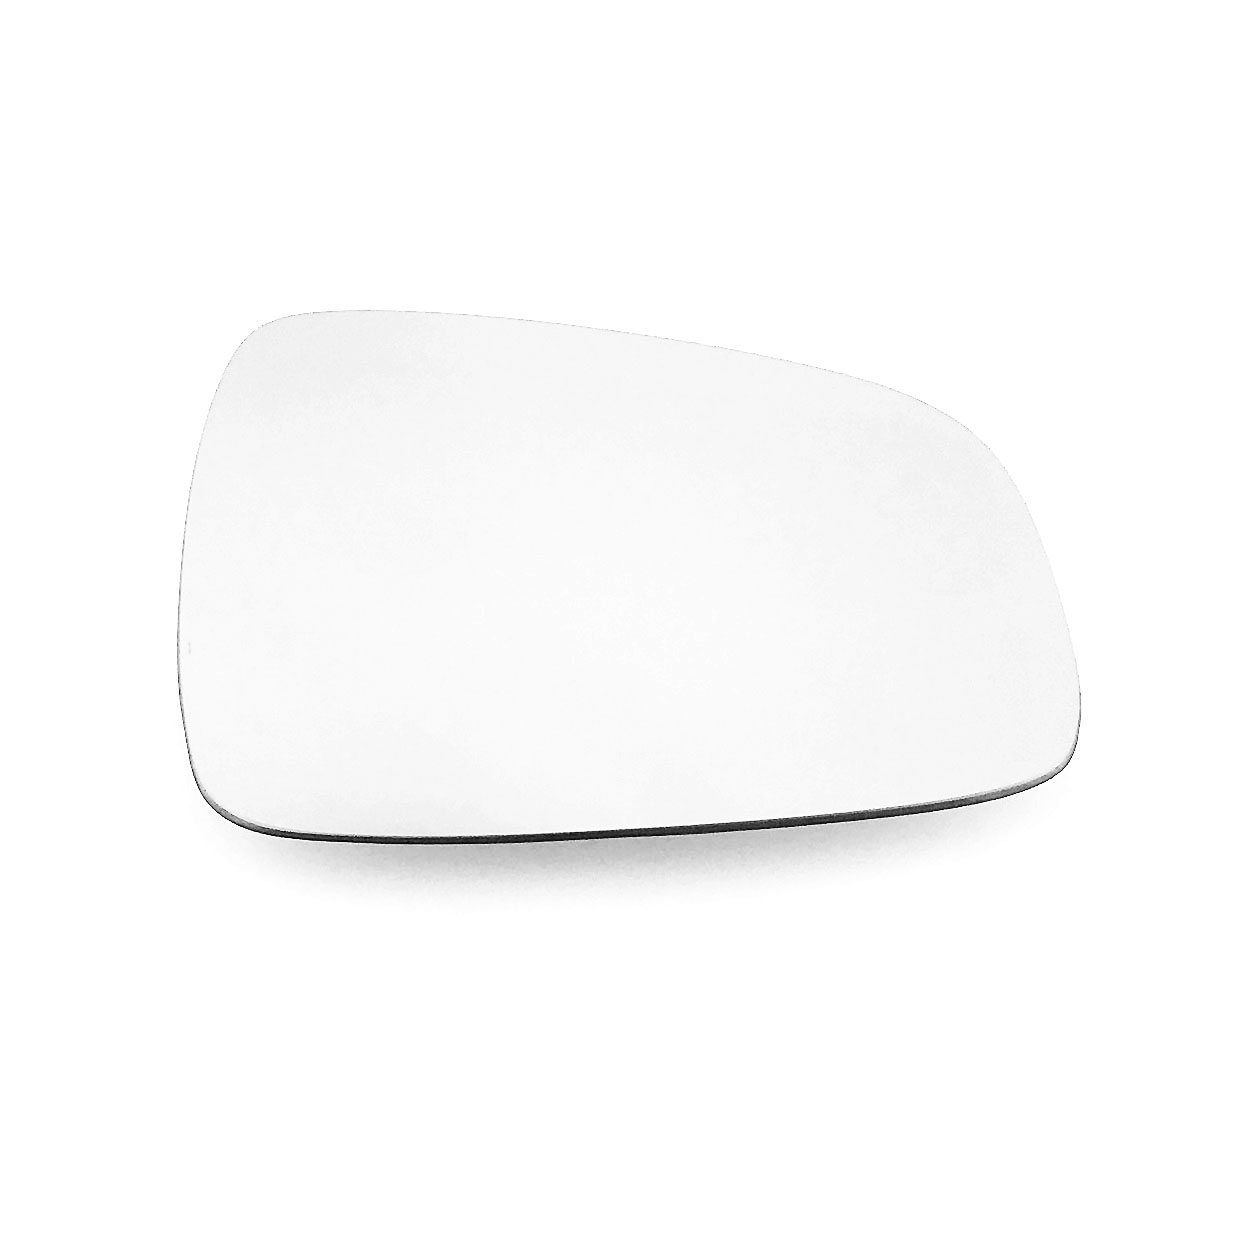 Dacia Duster Wing Mirror Glass RIGHT HAND ( UK Driver Side ) 2013 to 2017 – Convex Wing Mirror